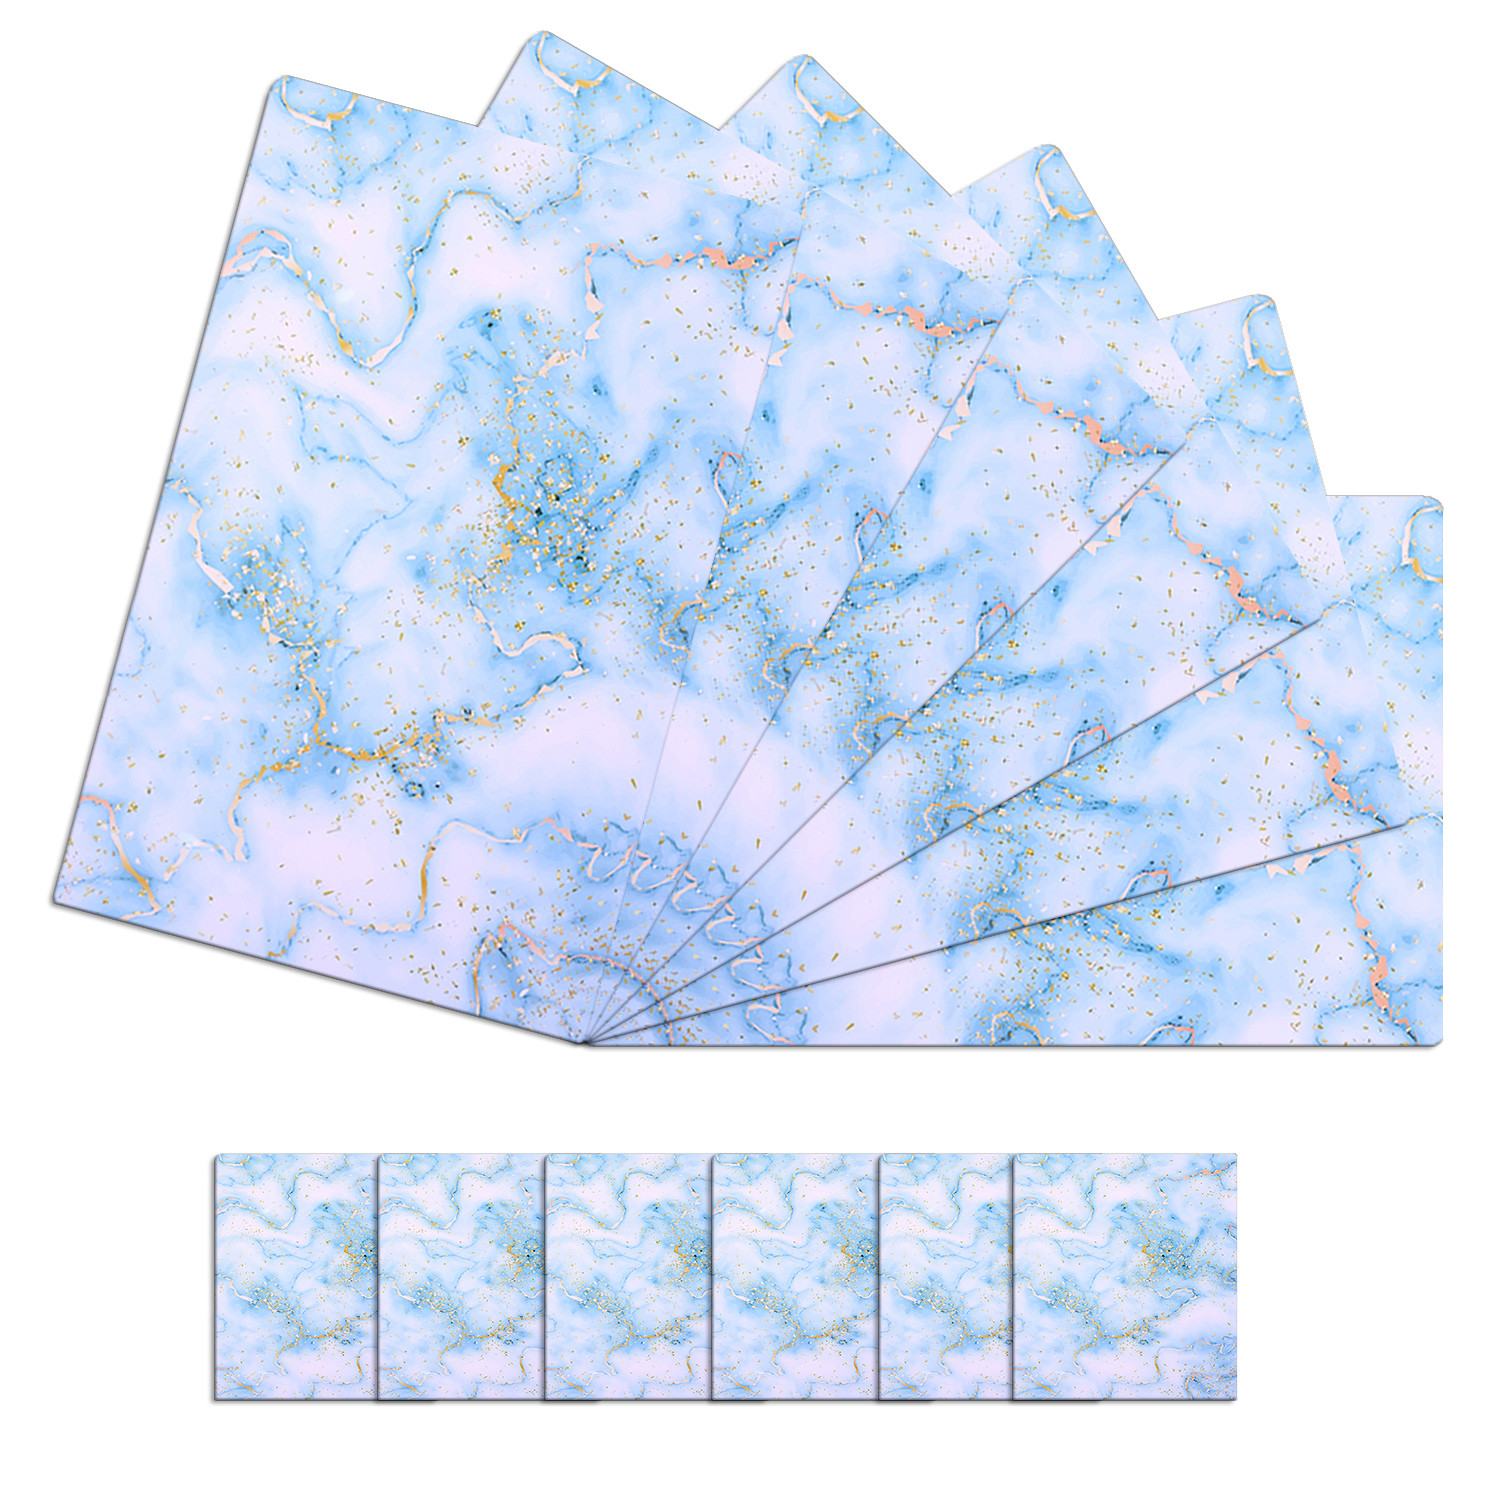 Kuber Industries Placemat | Table Placemats with Coasters | Table Placemats with Tea Coasters | Dining Table Placemats & Coasters Set | See Gold | 12 Piece Set | Sky Blue